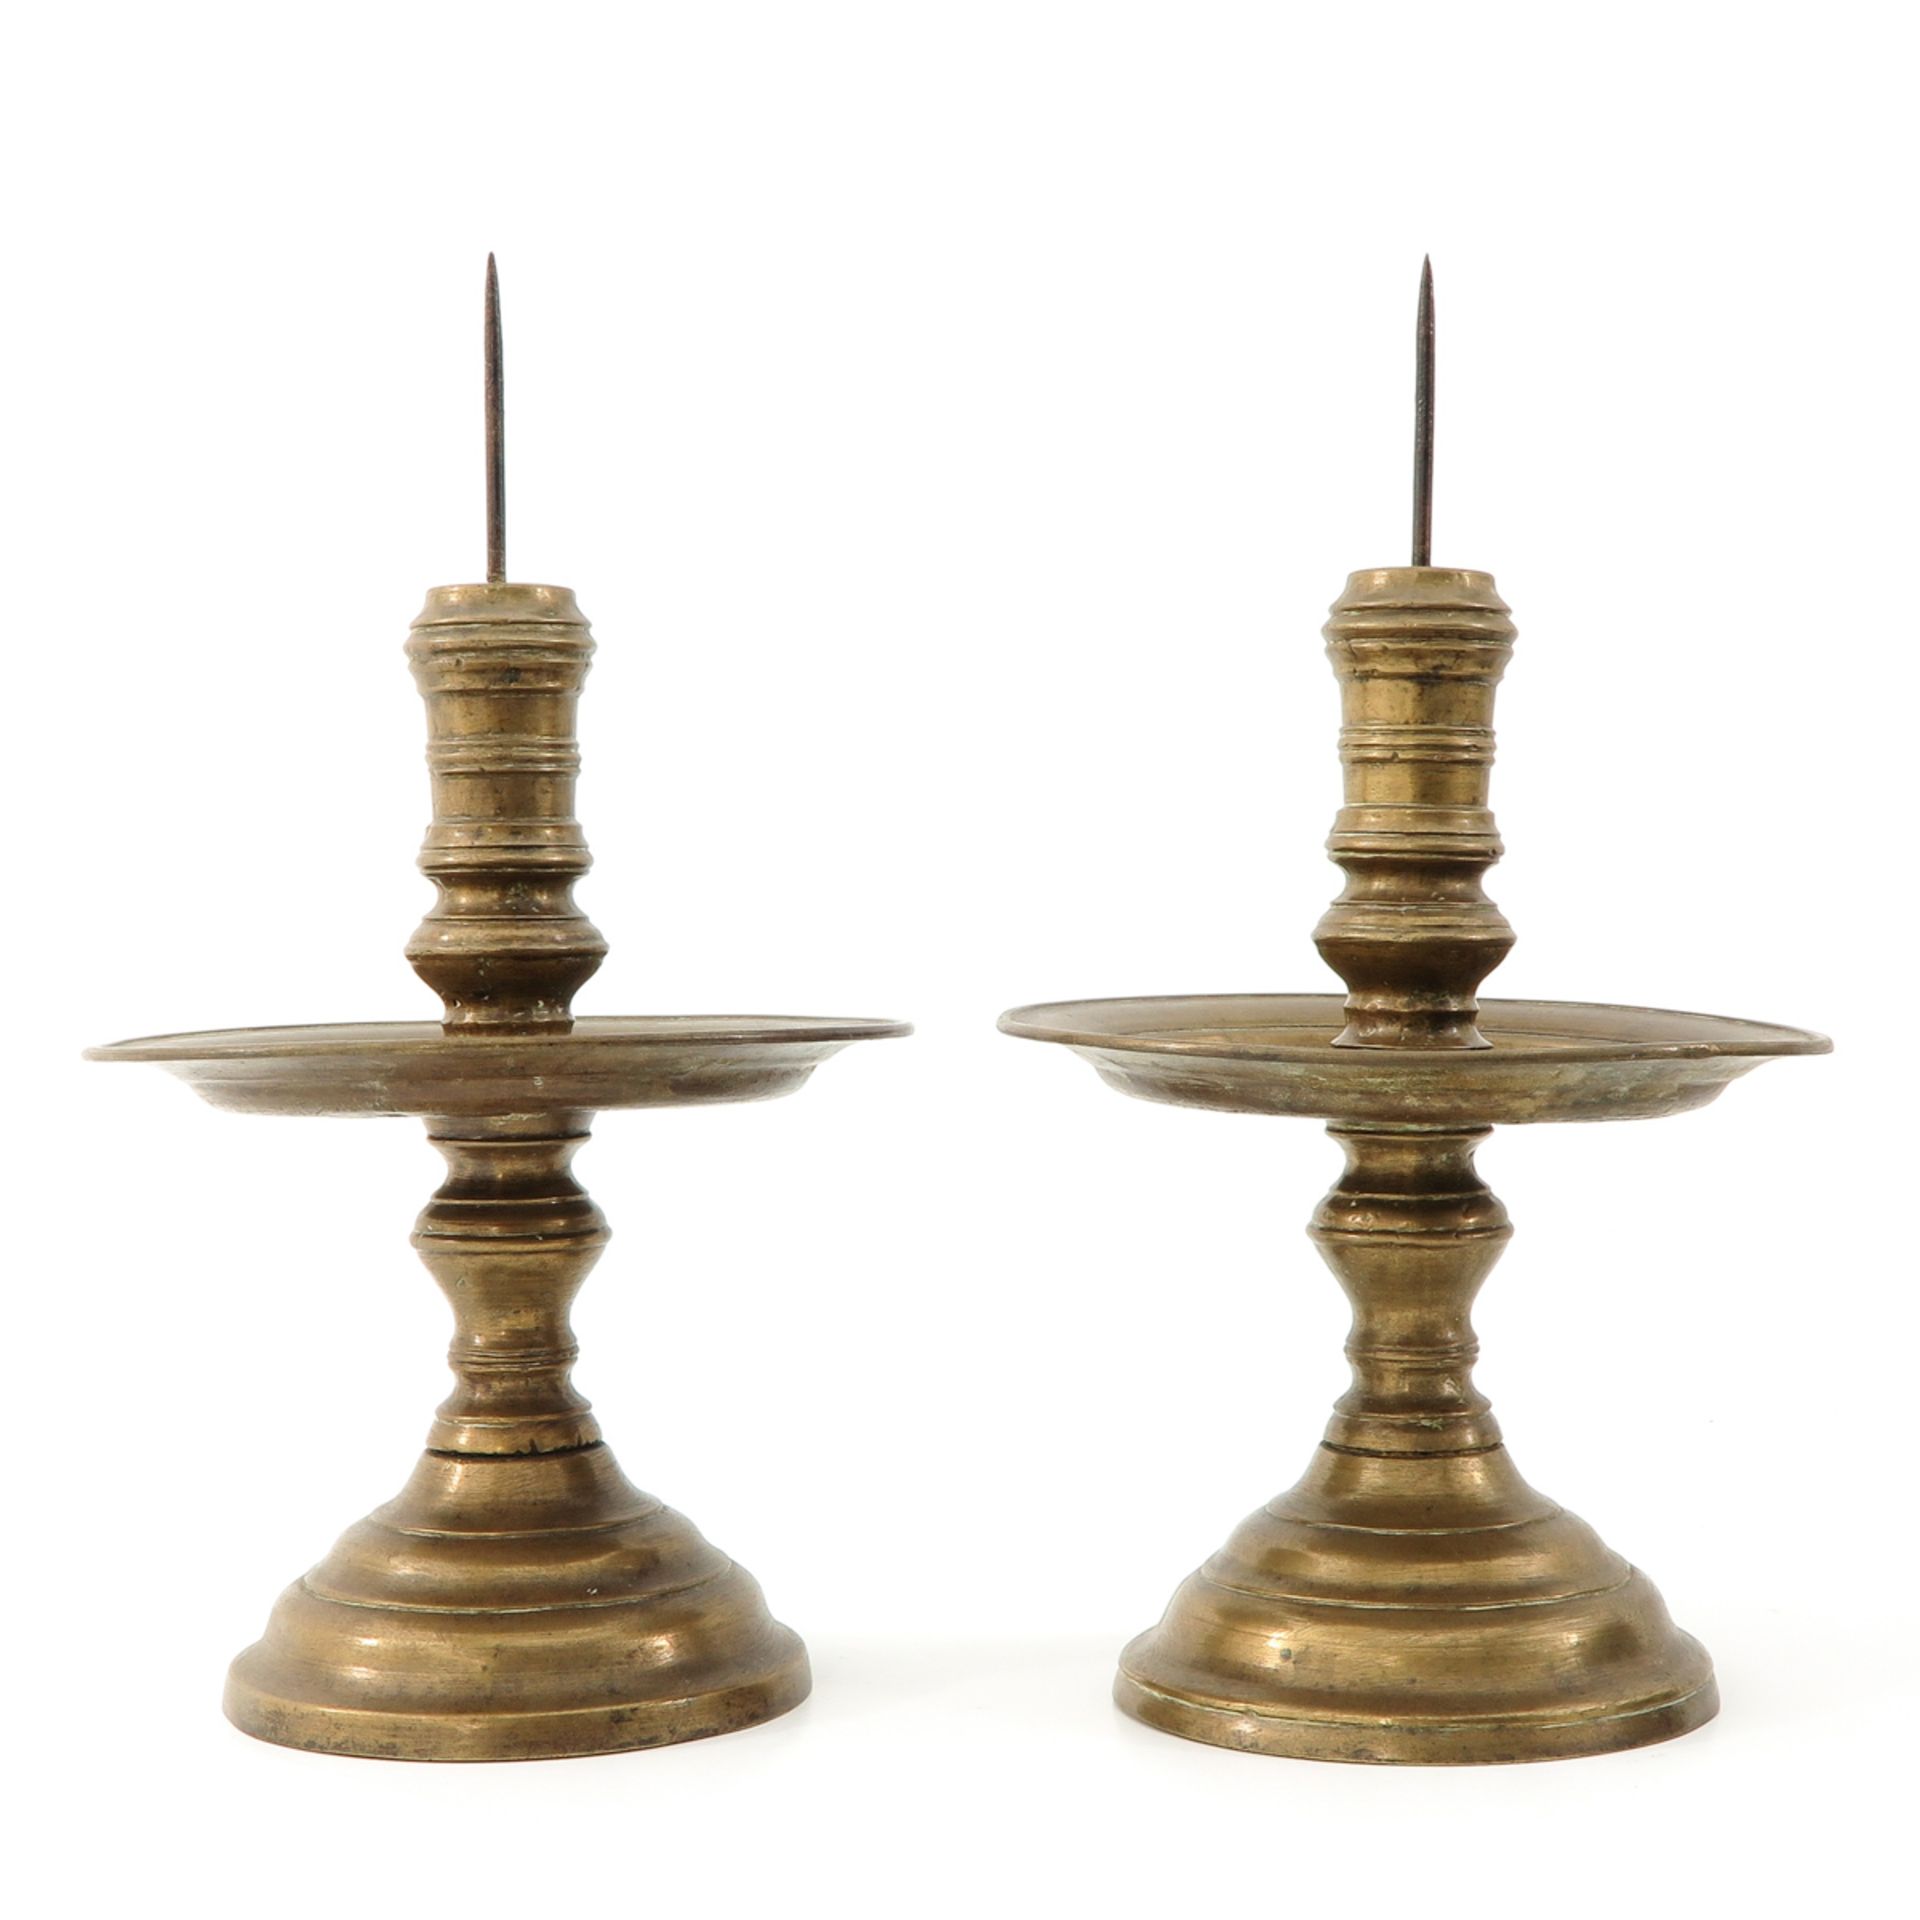 A Pair of Antique Brass Candlesticks - Image 4 of 7